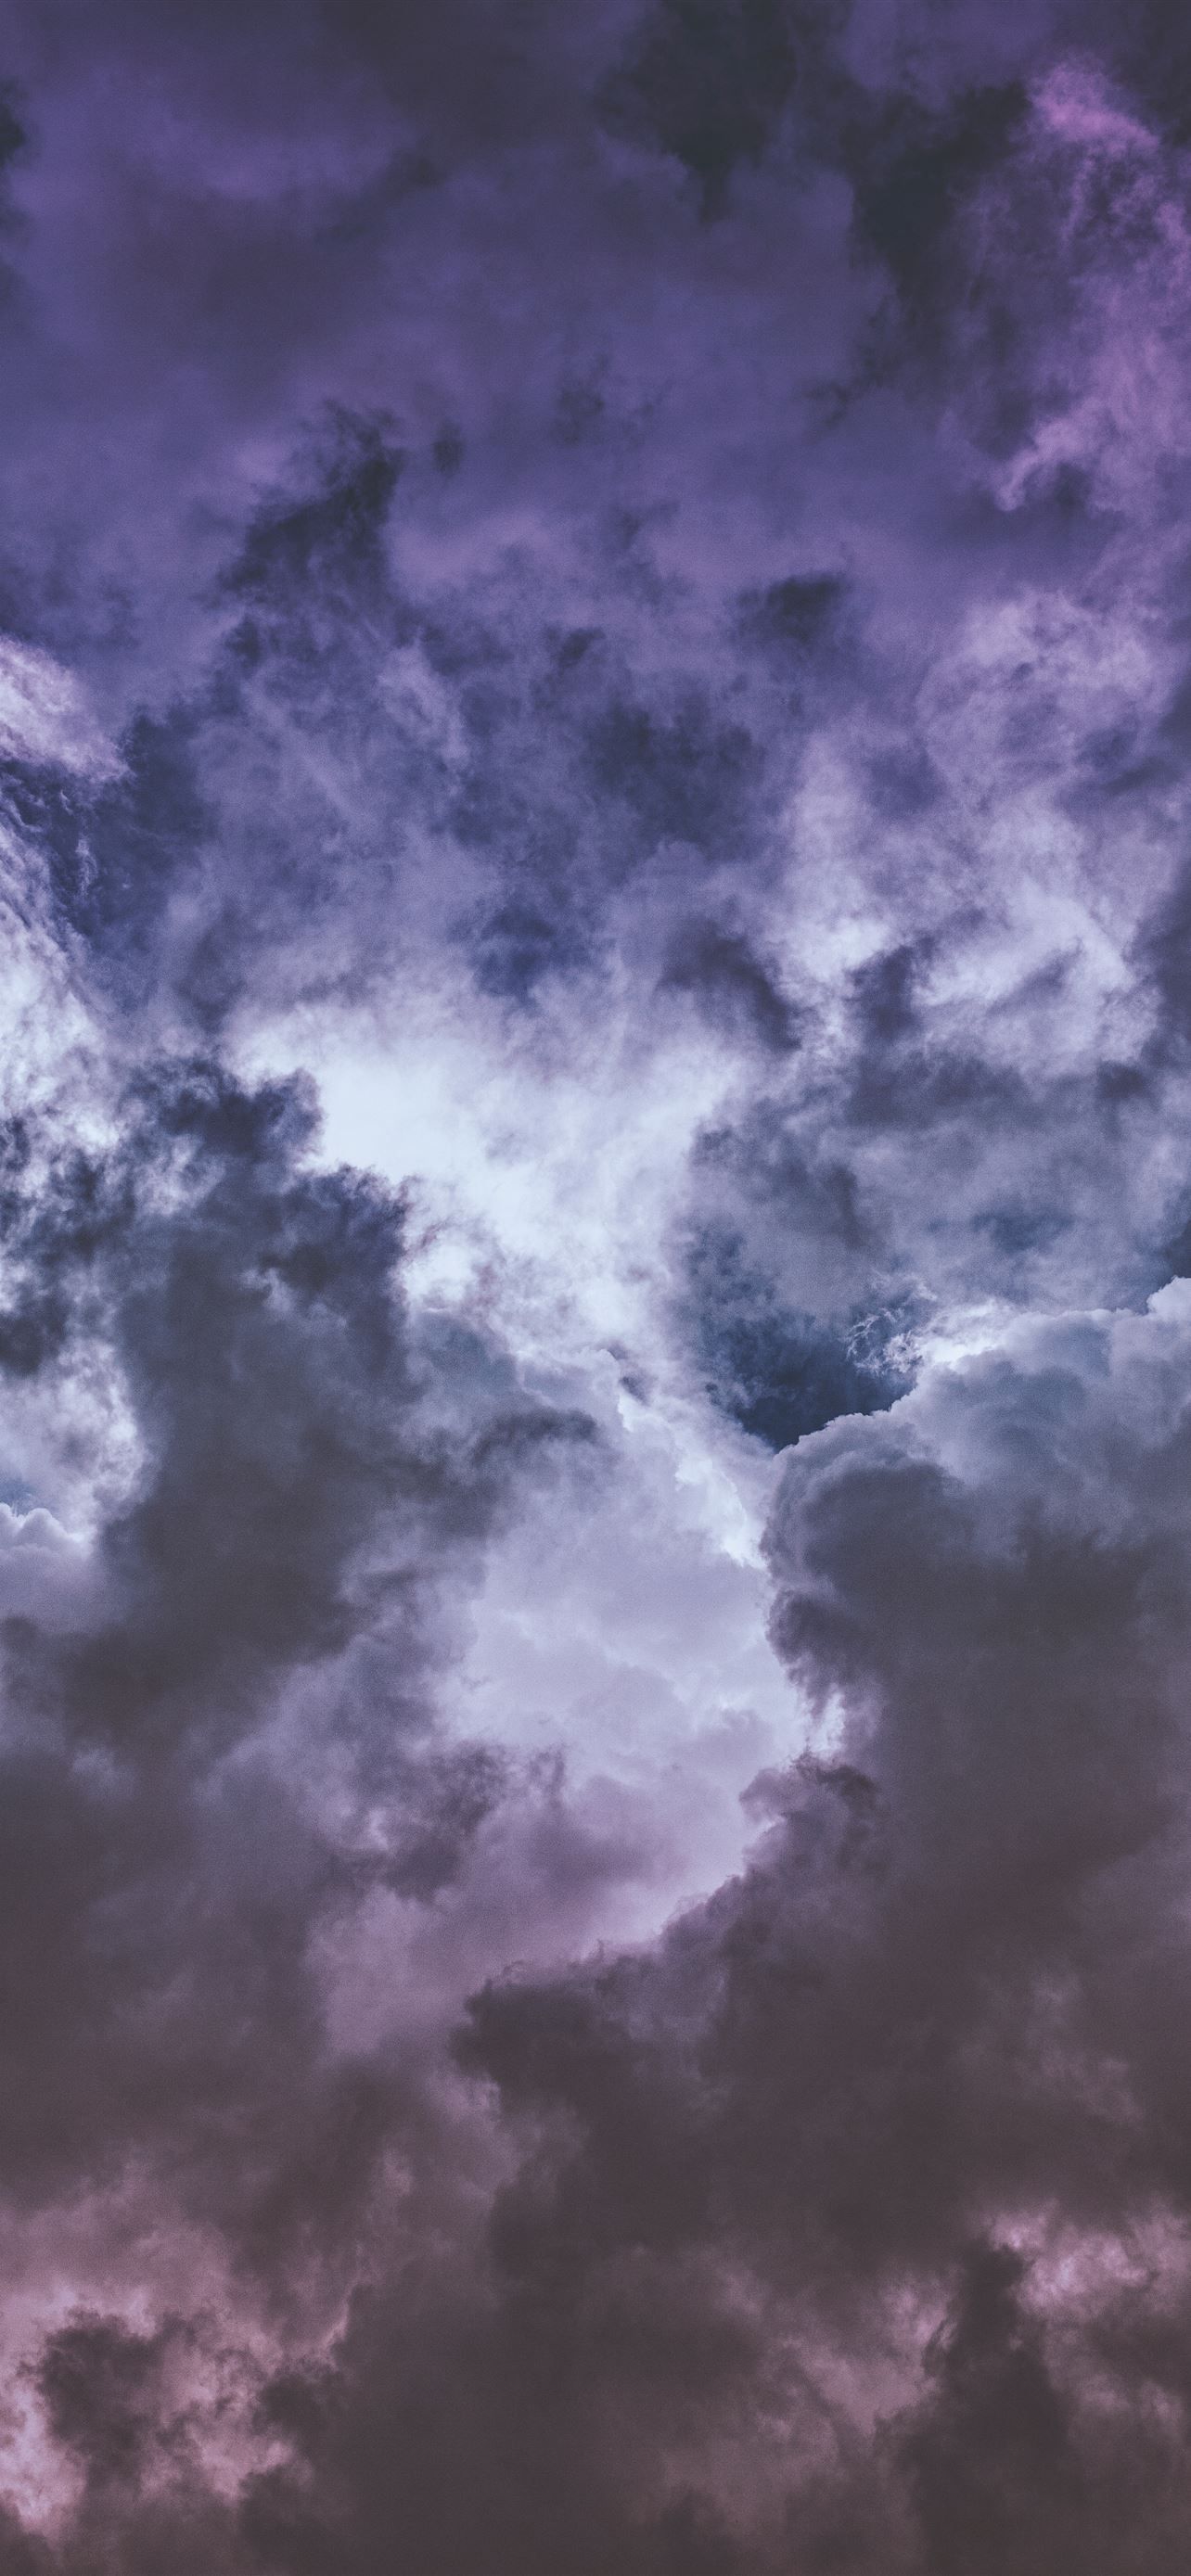 Wisteria clouds iPhone 12 Wallpaper Free Download